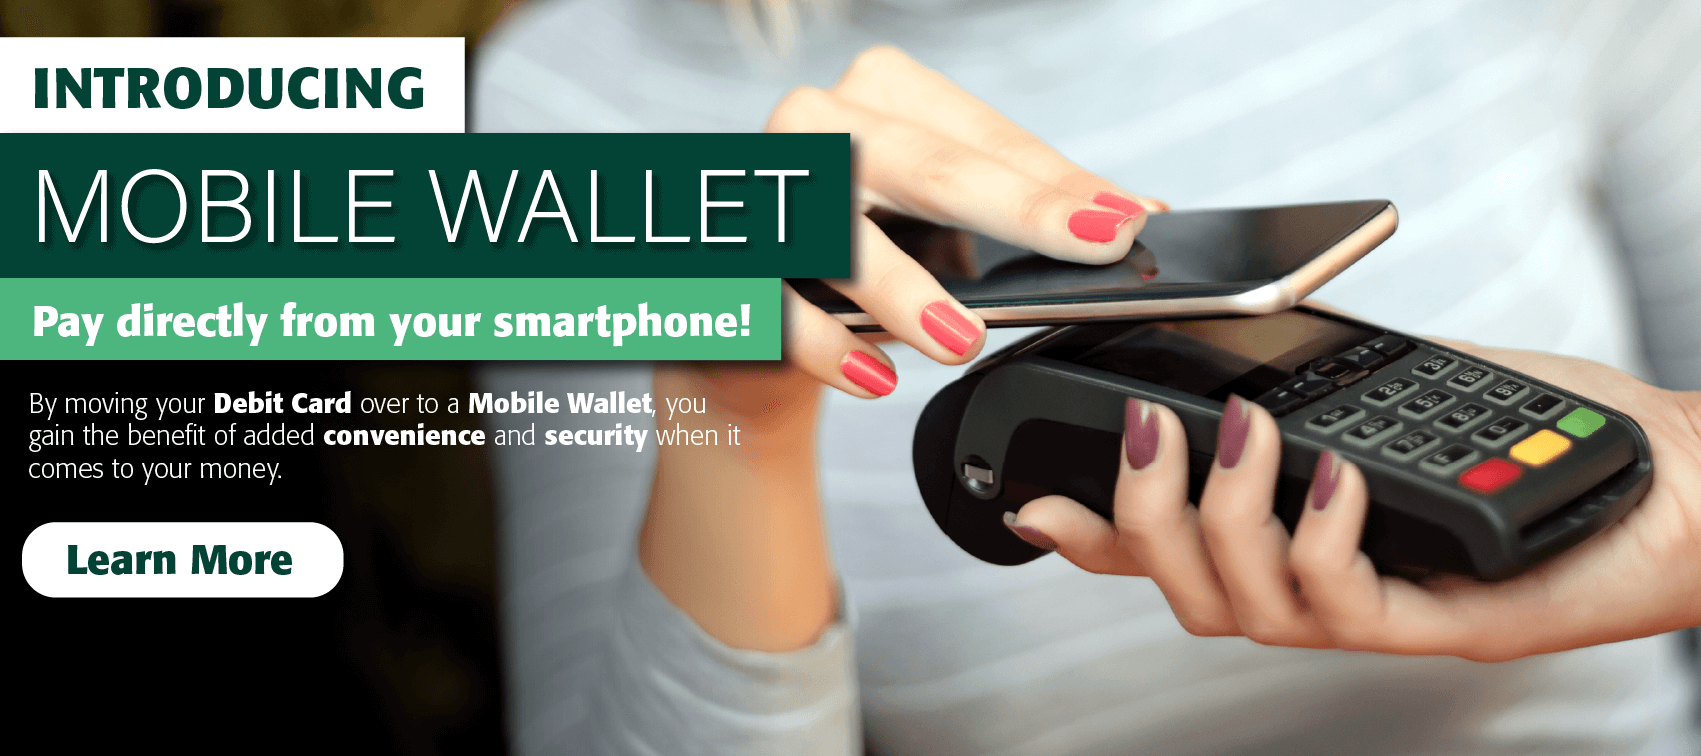 Introducing Mobile Wallet. Pay directly from your smartphone! By moving your debit card over to a mobile wallet, you gain the benefit of added convenience and security when it comes to your money. Learn more.